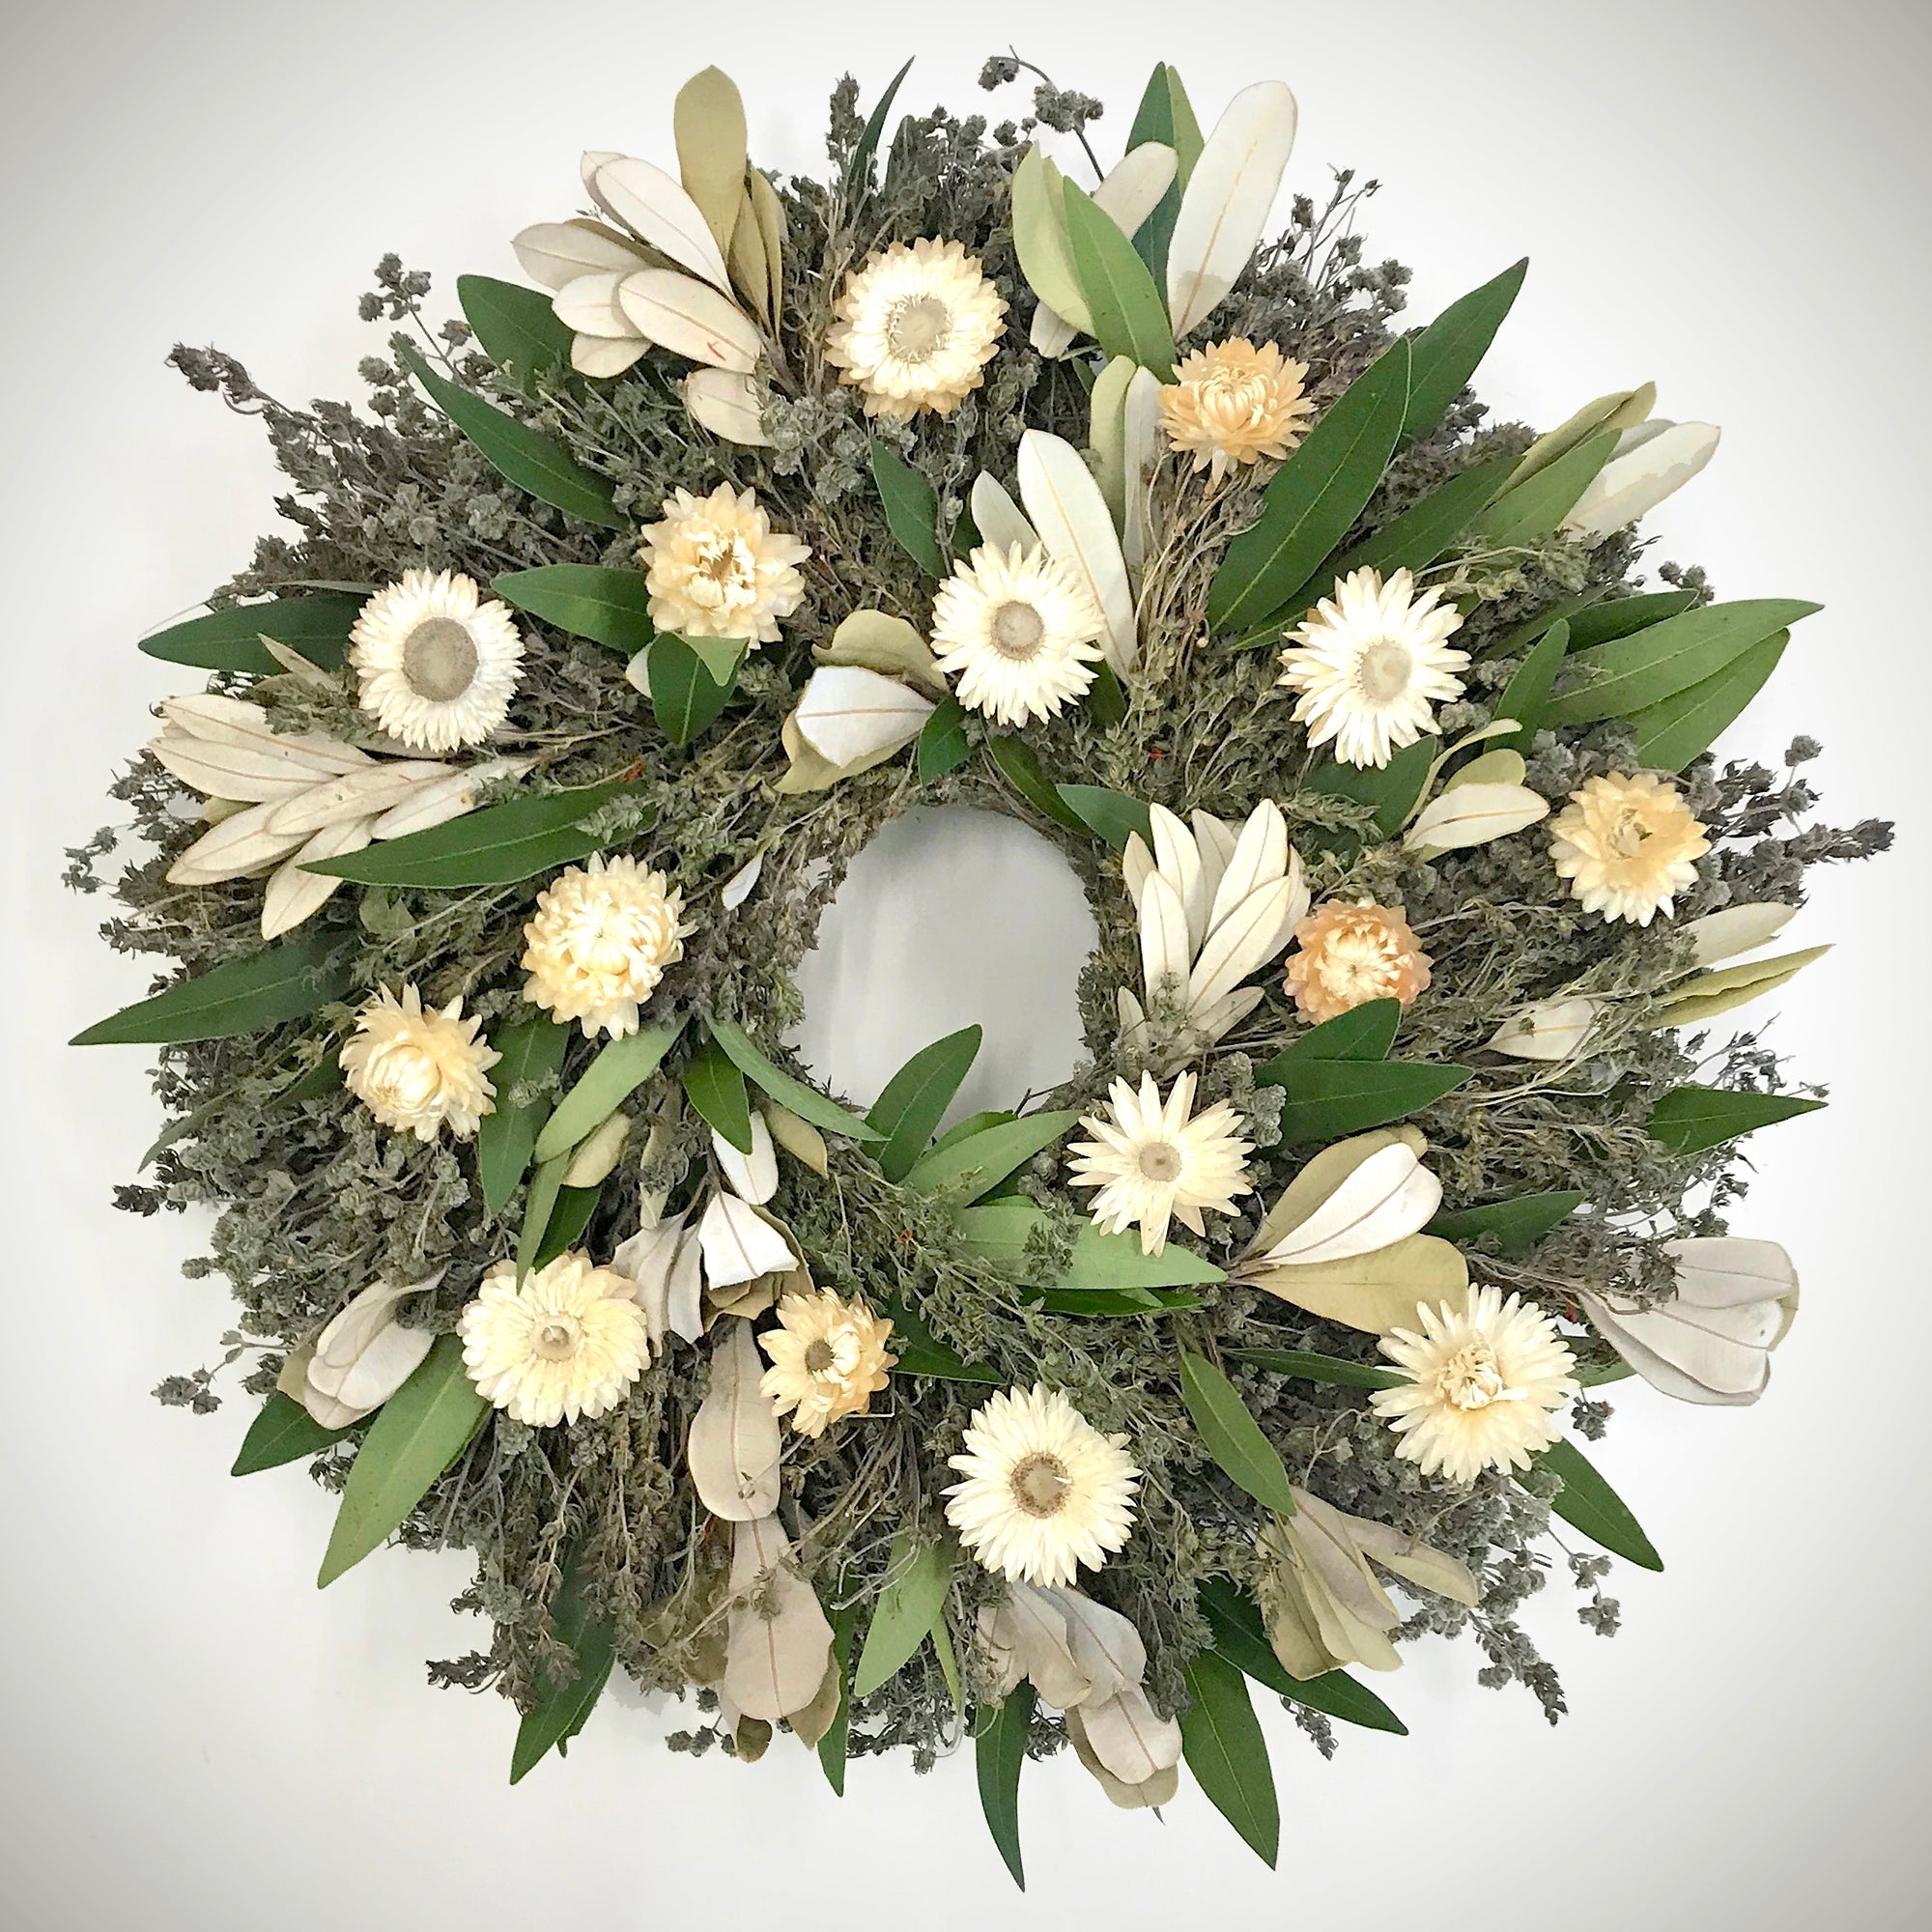 Pearl Wreath by Creekside Farms